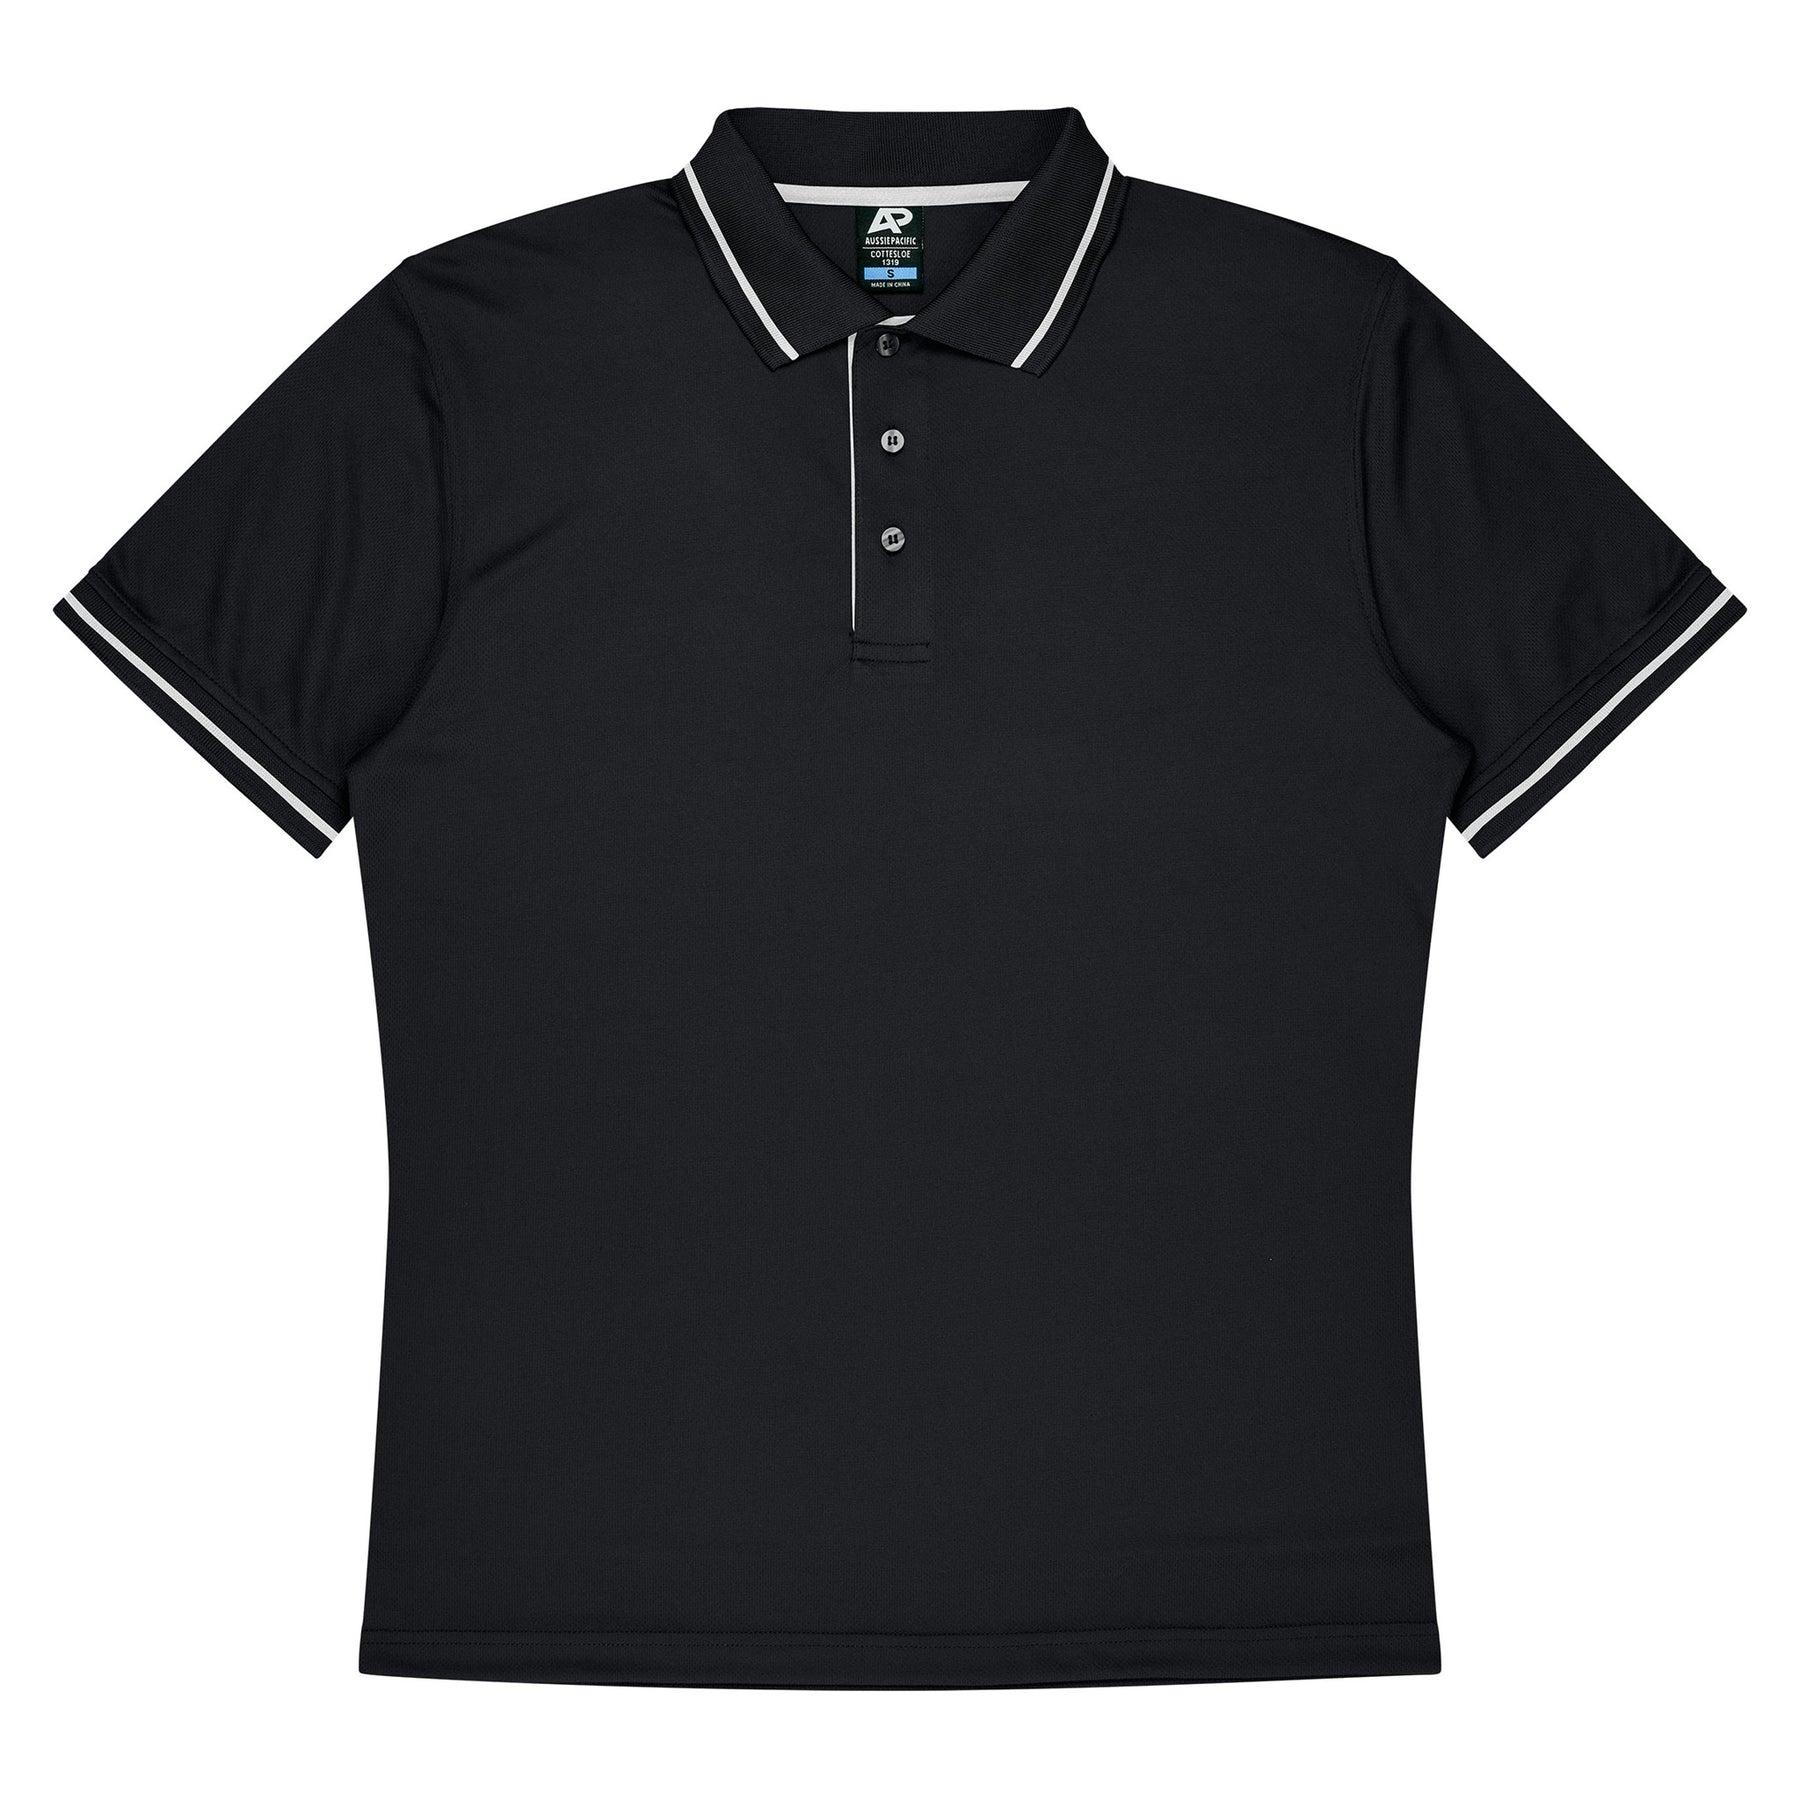 aussie pacific cottesloe mens polo in black white